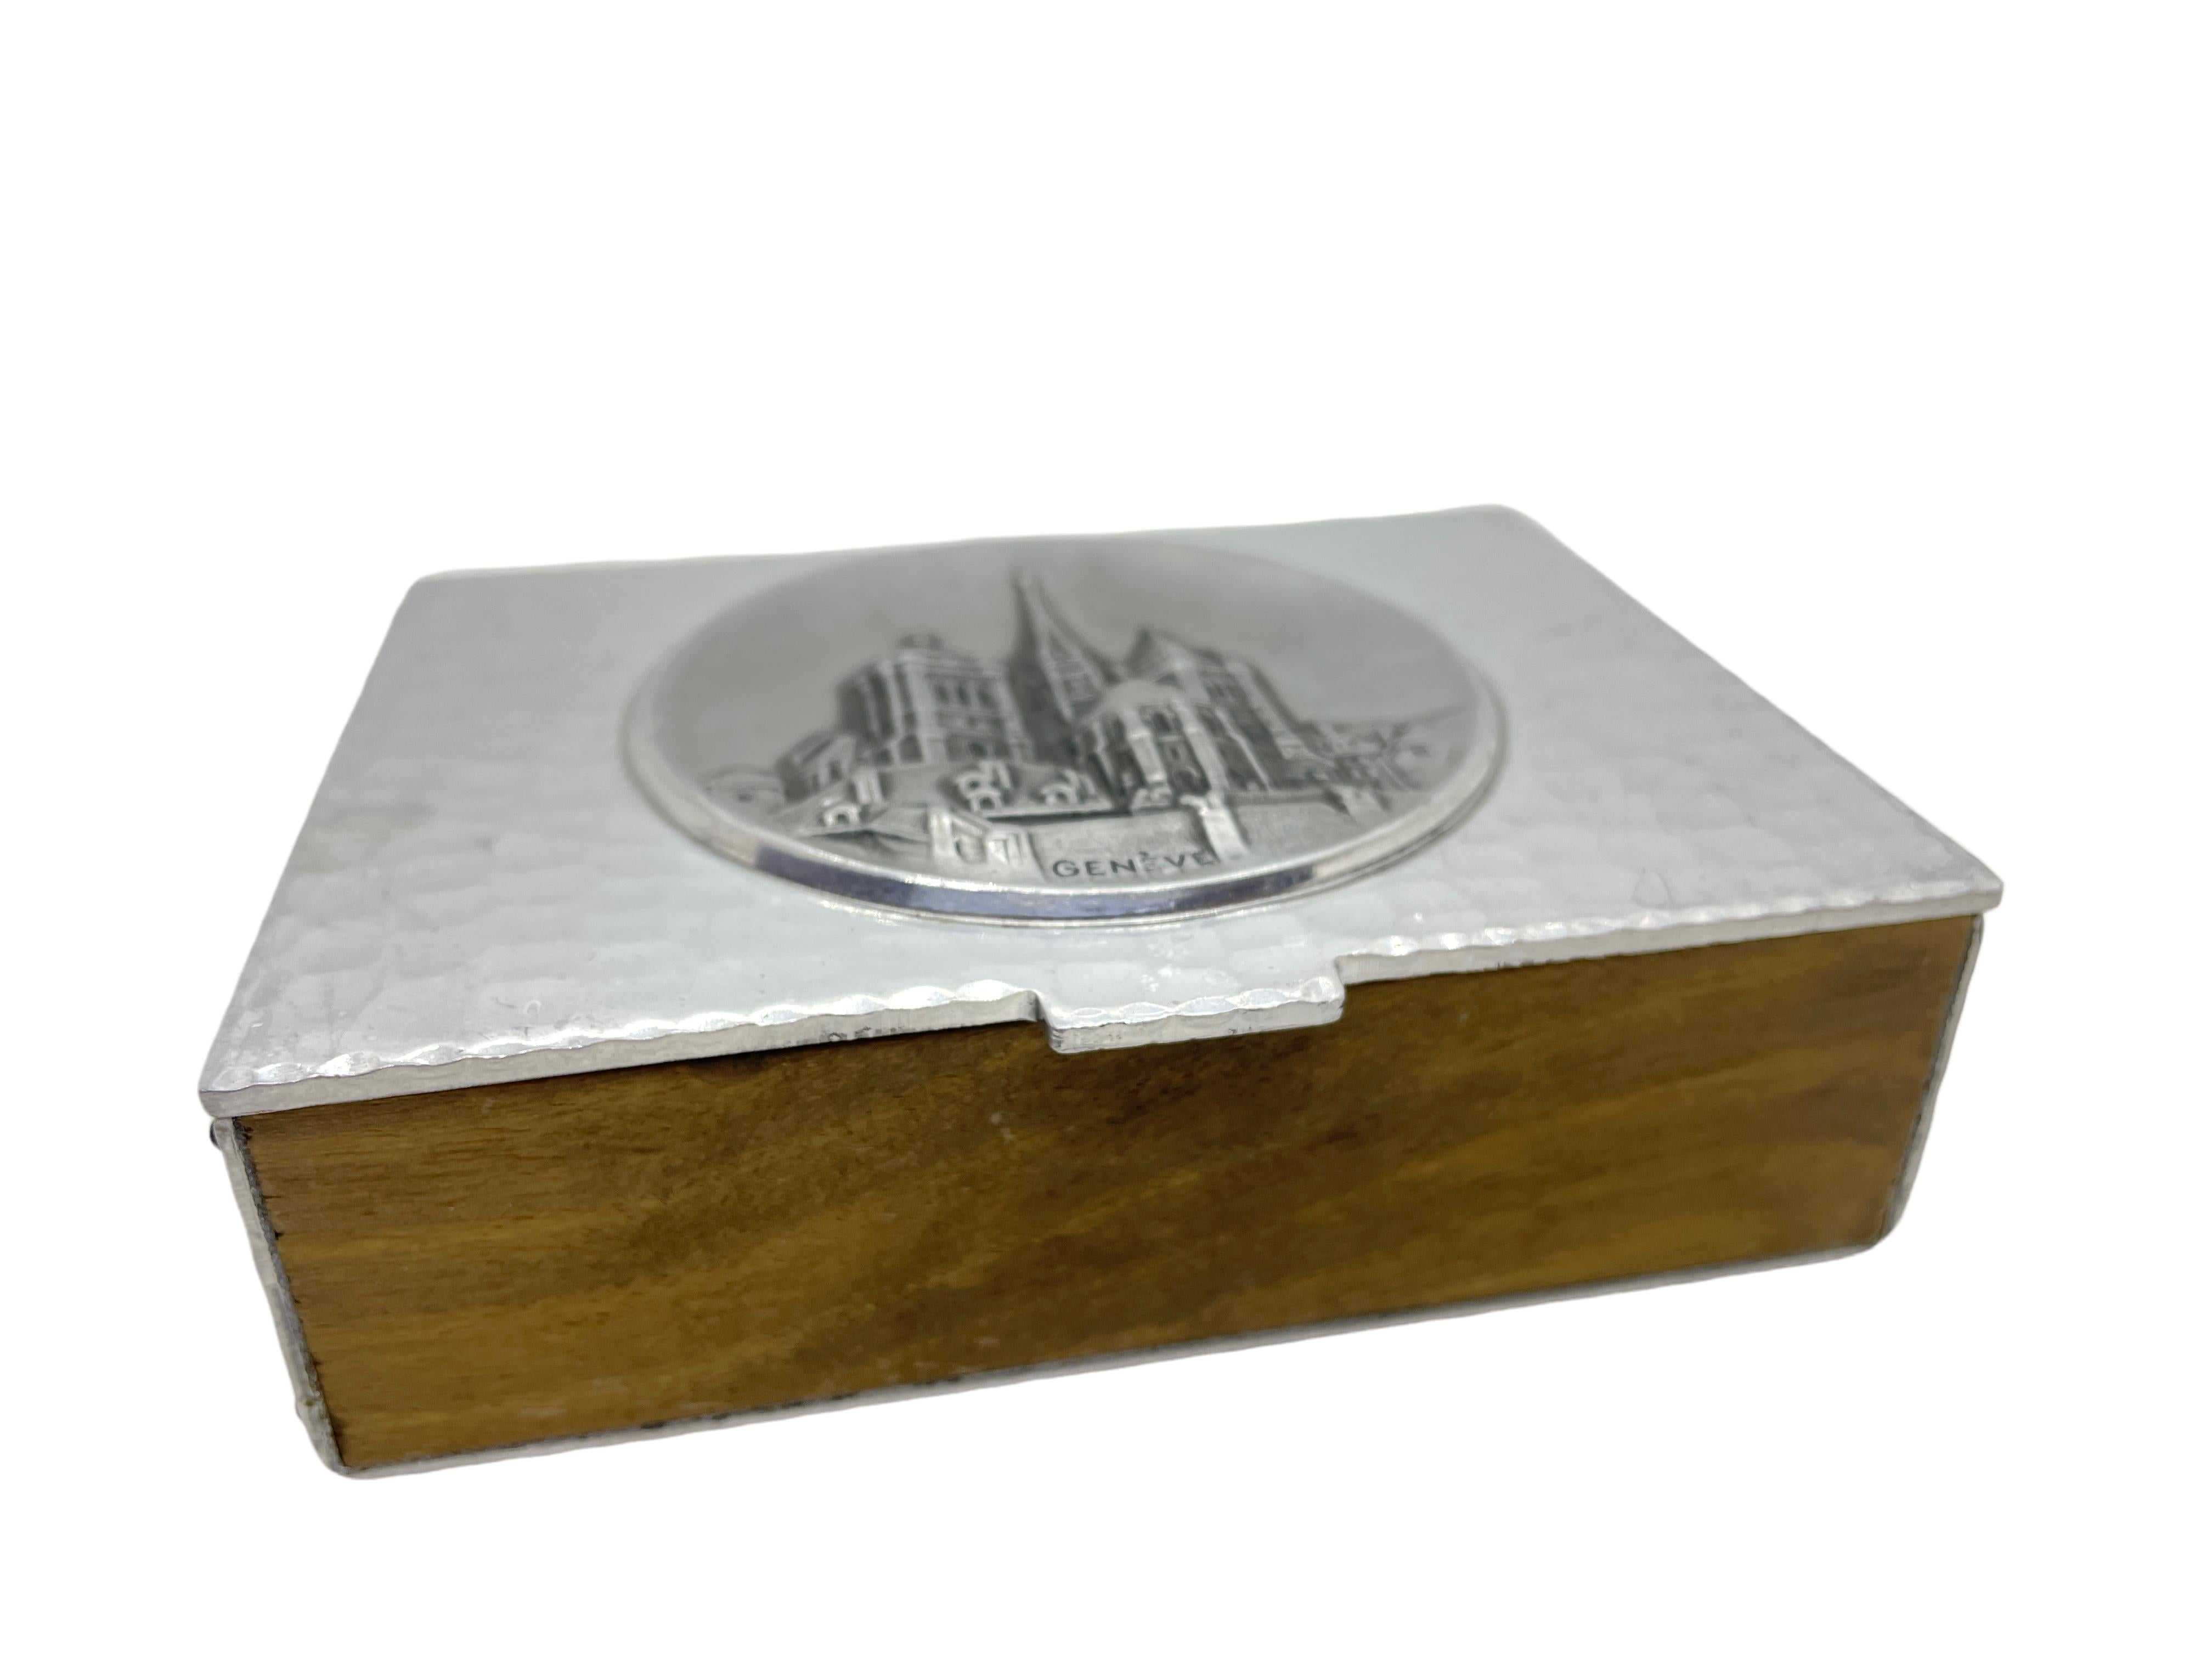 Cigarette box made of cedar wood and hand-hammered metal by SIGG SIGAL Switzerland. It has a beautiful patina with a view scratches at the base or ground. A nice addition in every man cave.